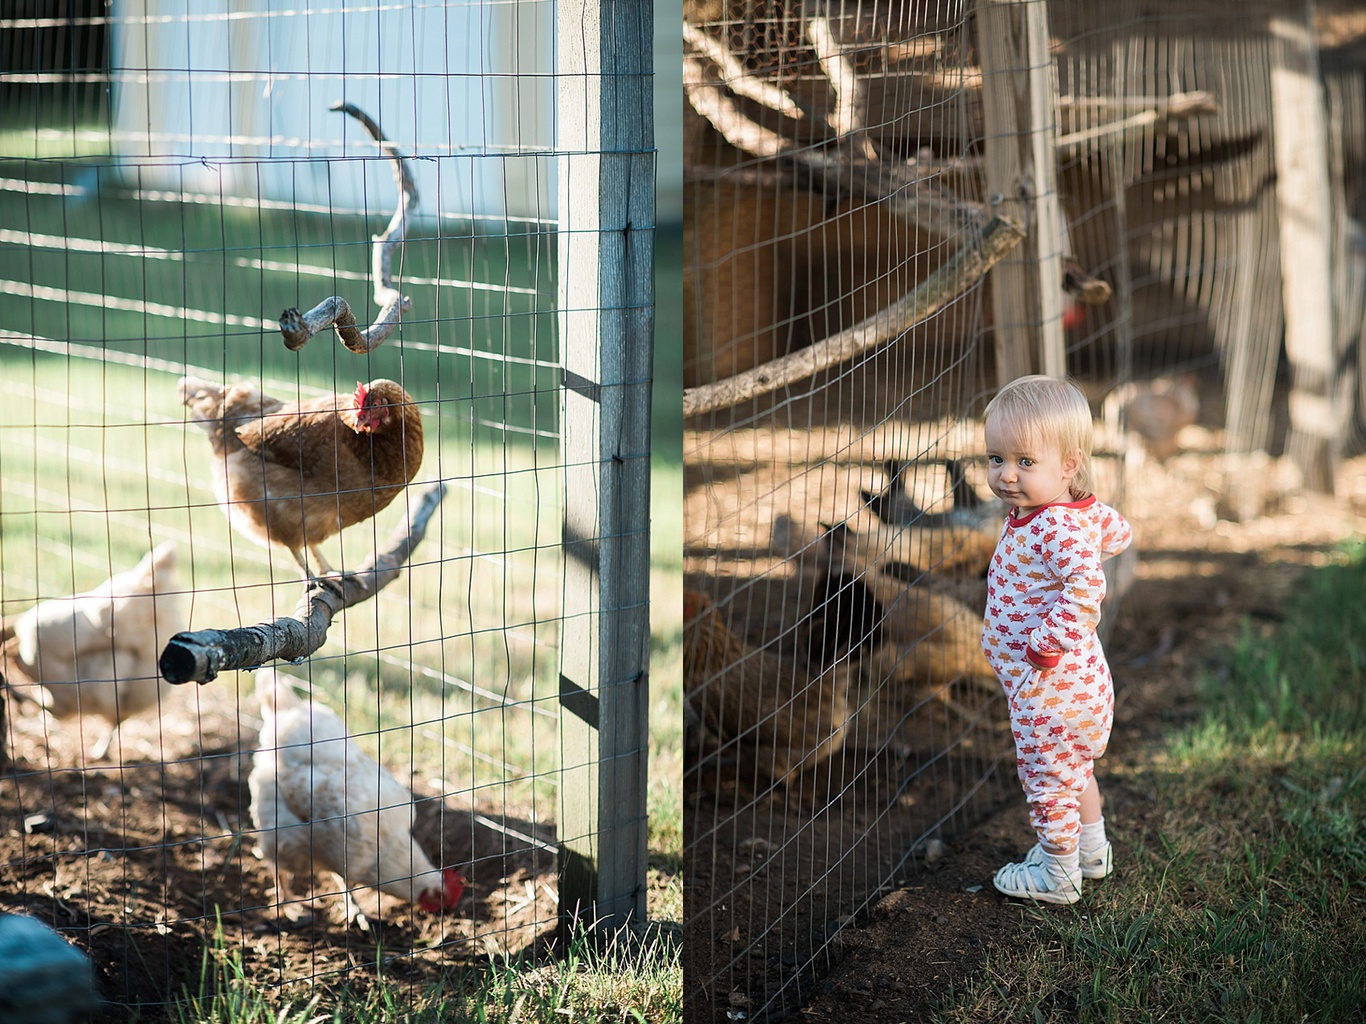 Toddler looks at a chicken coop in the Saugatuck, Michigan area